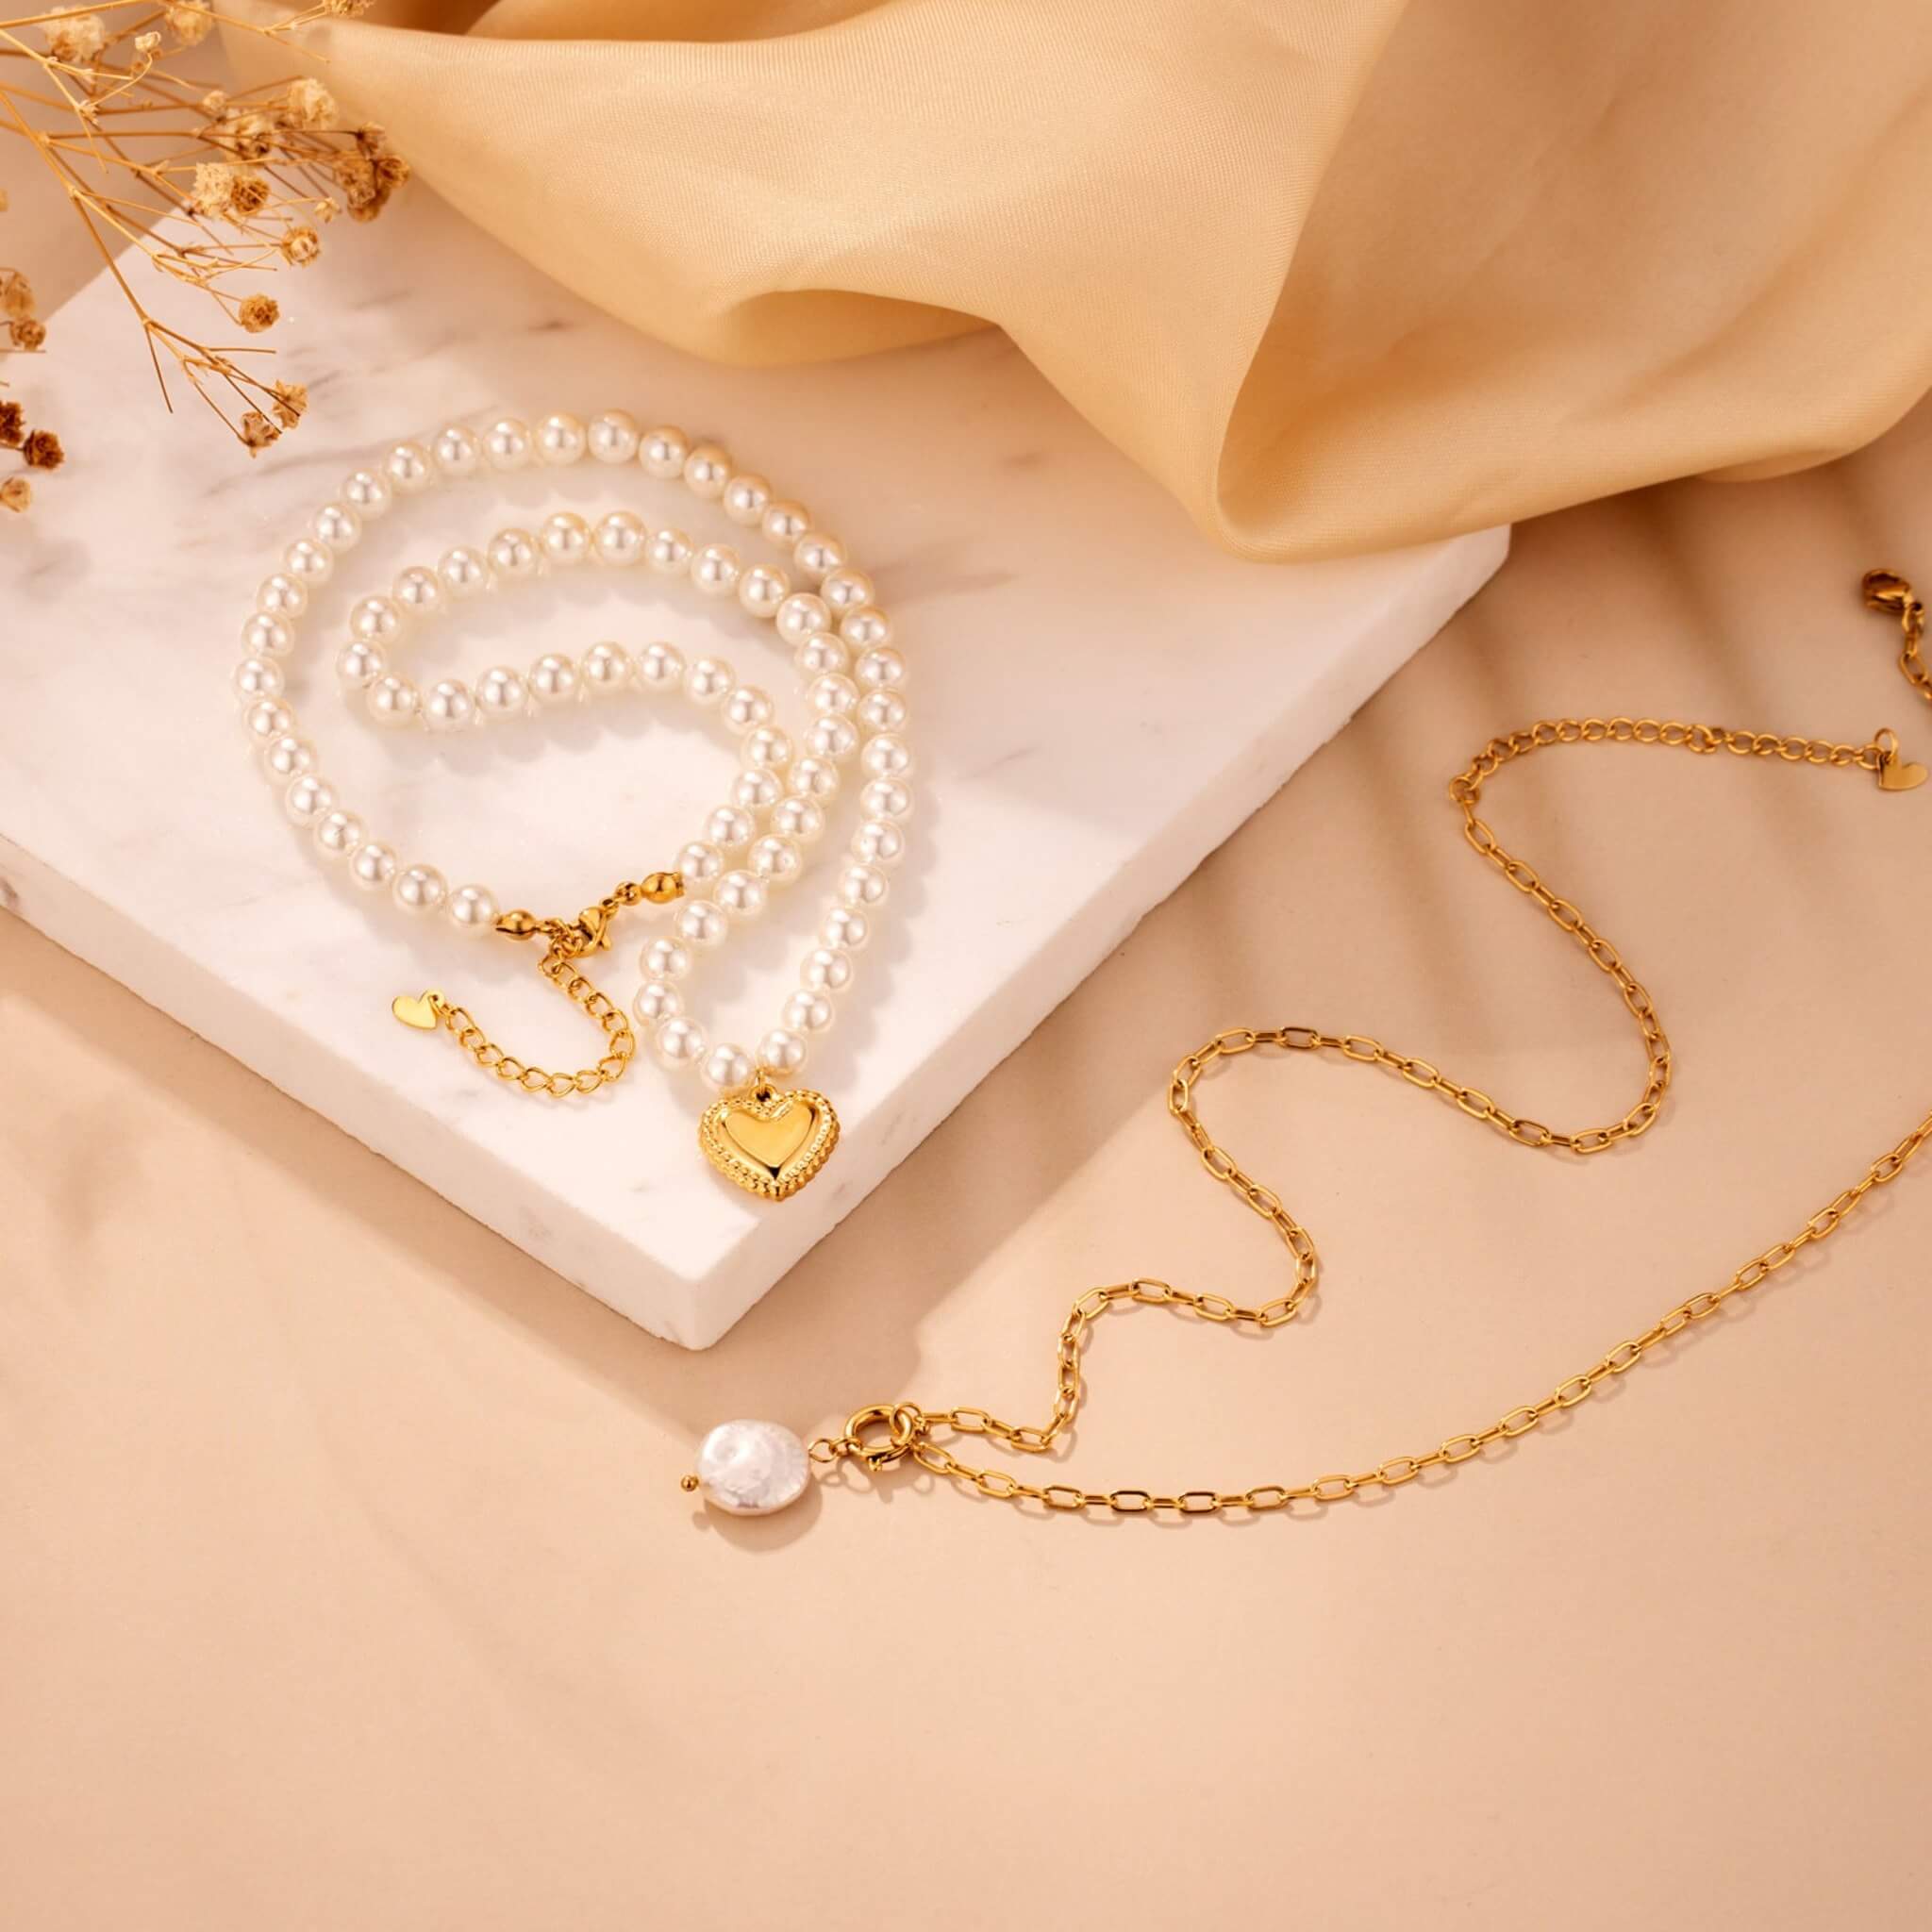 Vintage Chic Pearl Necklace  UponBasics   